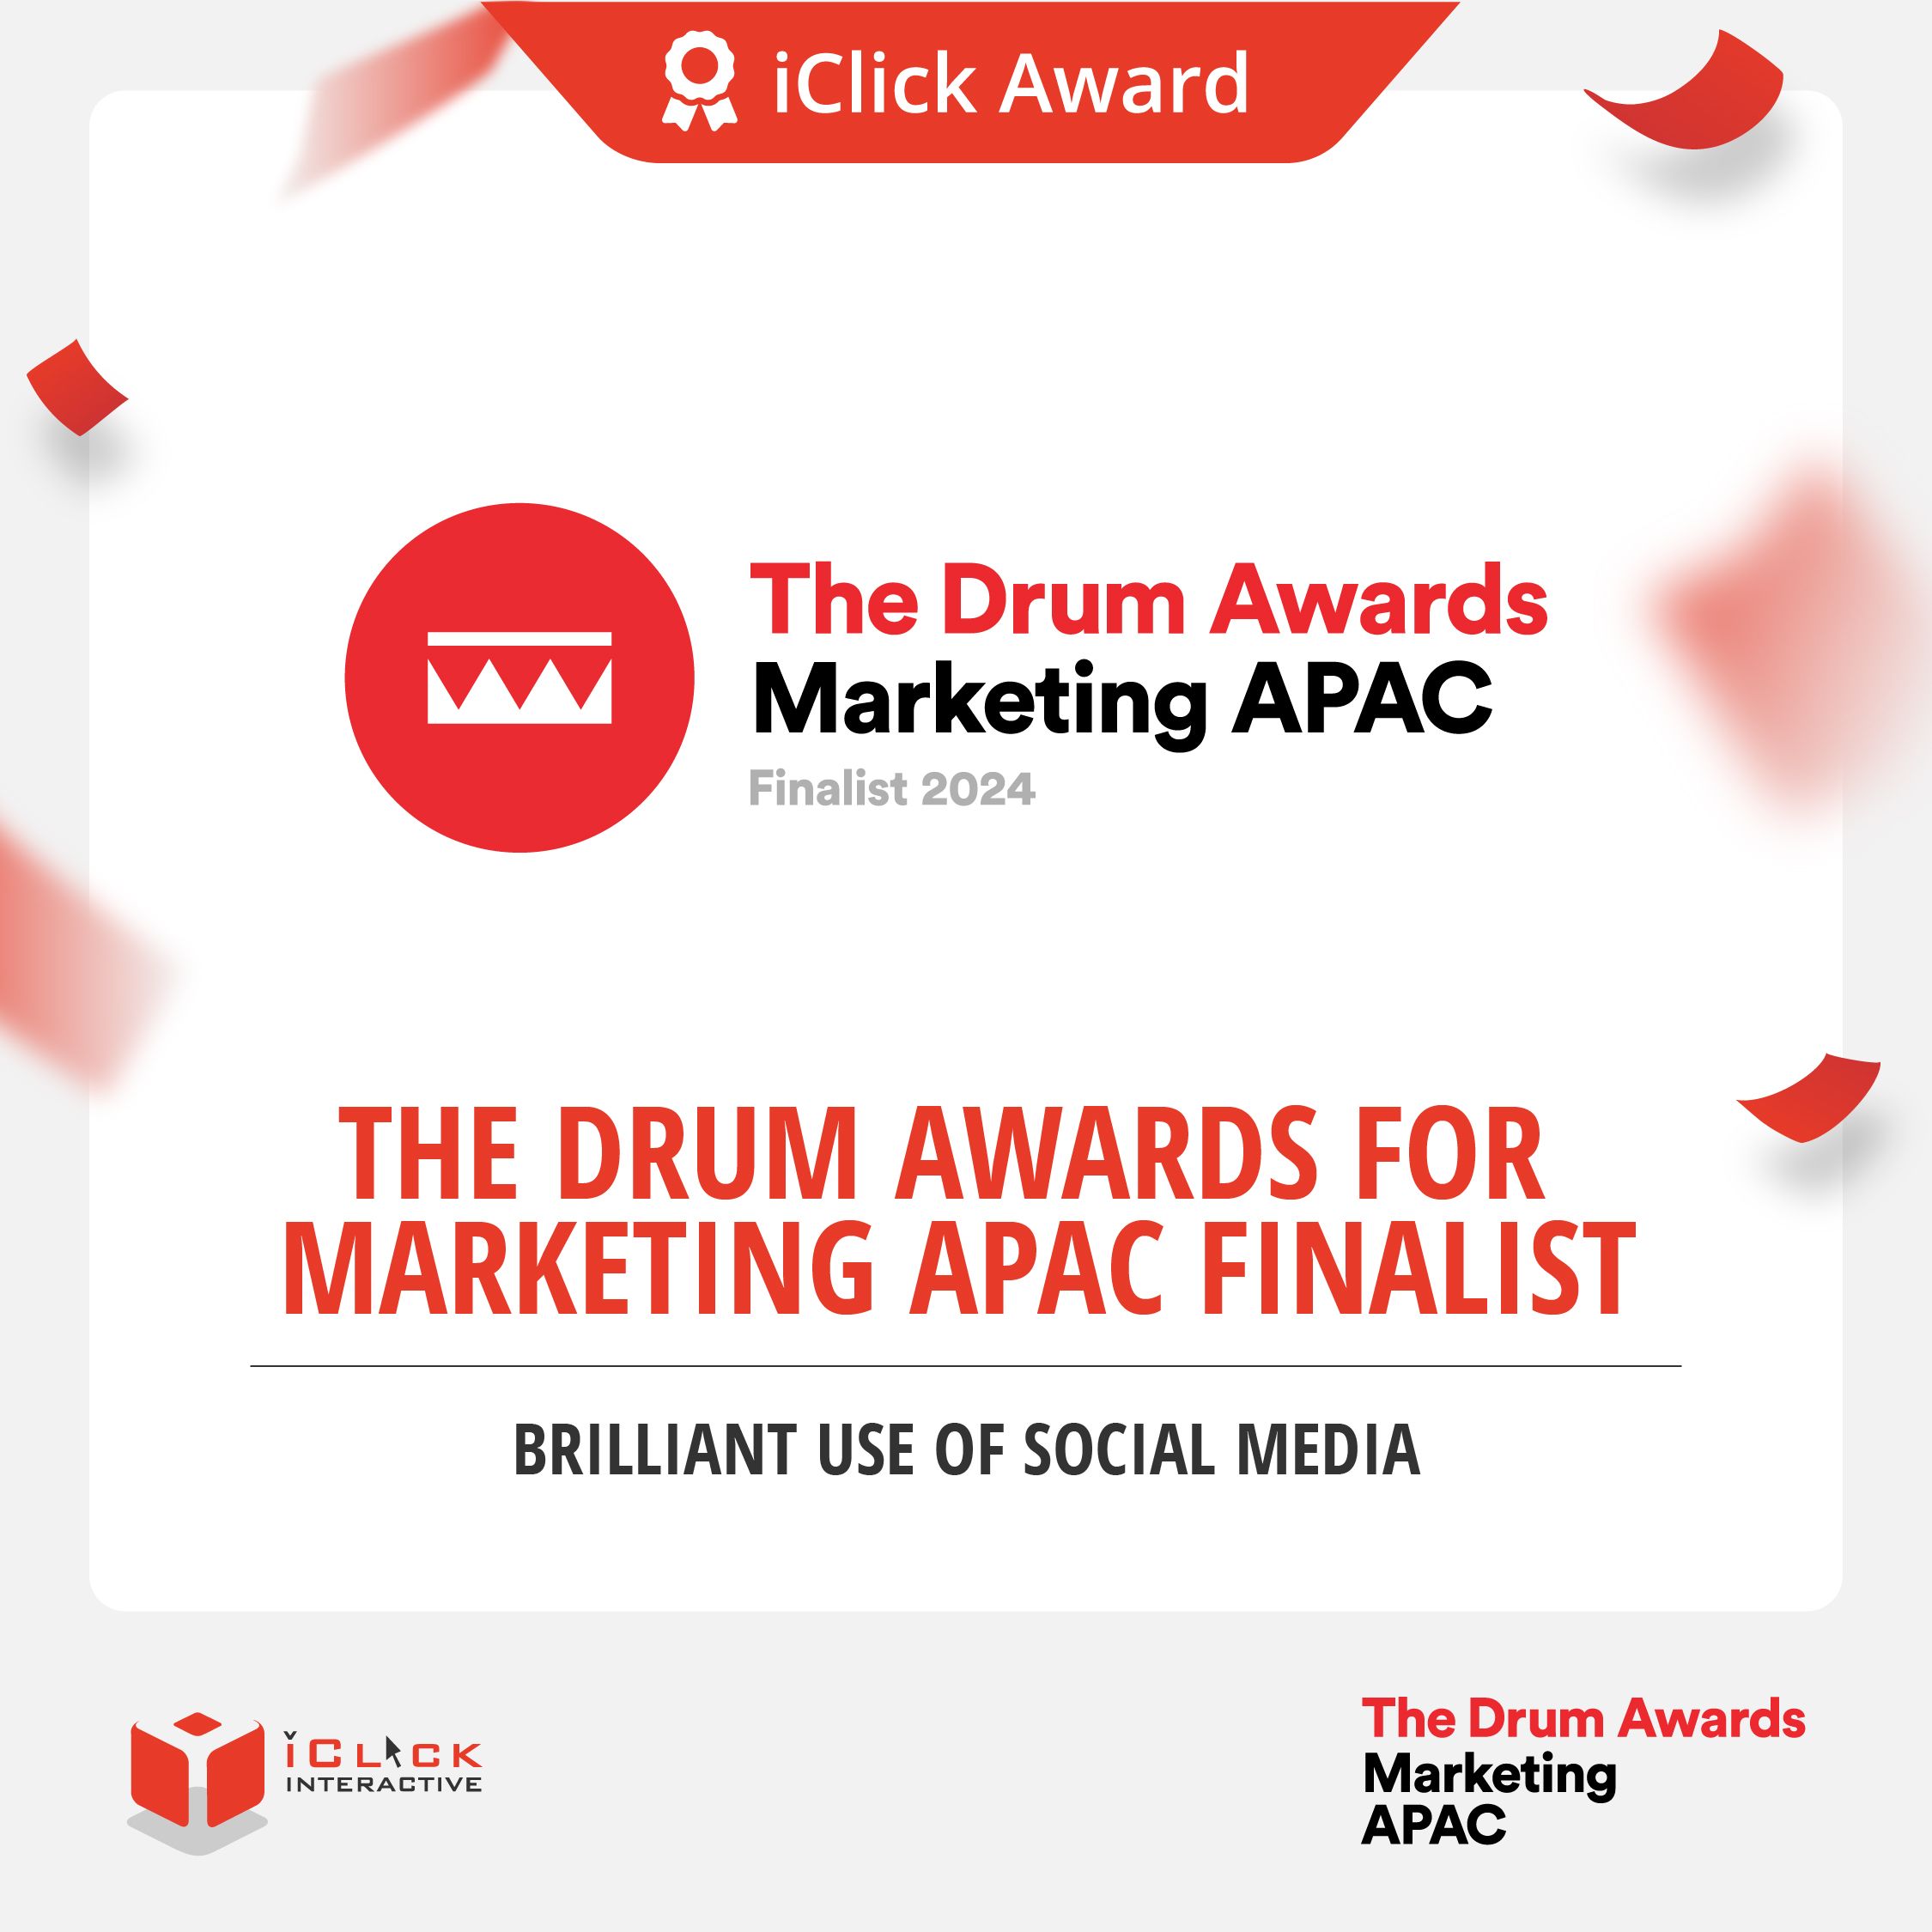 iClick is a Finalist at The Drum Awards for Marketing APAC!